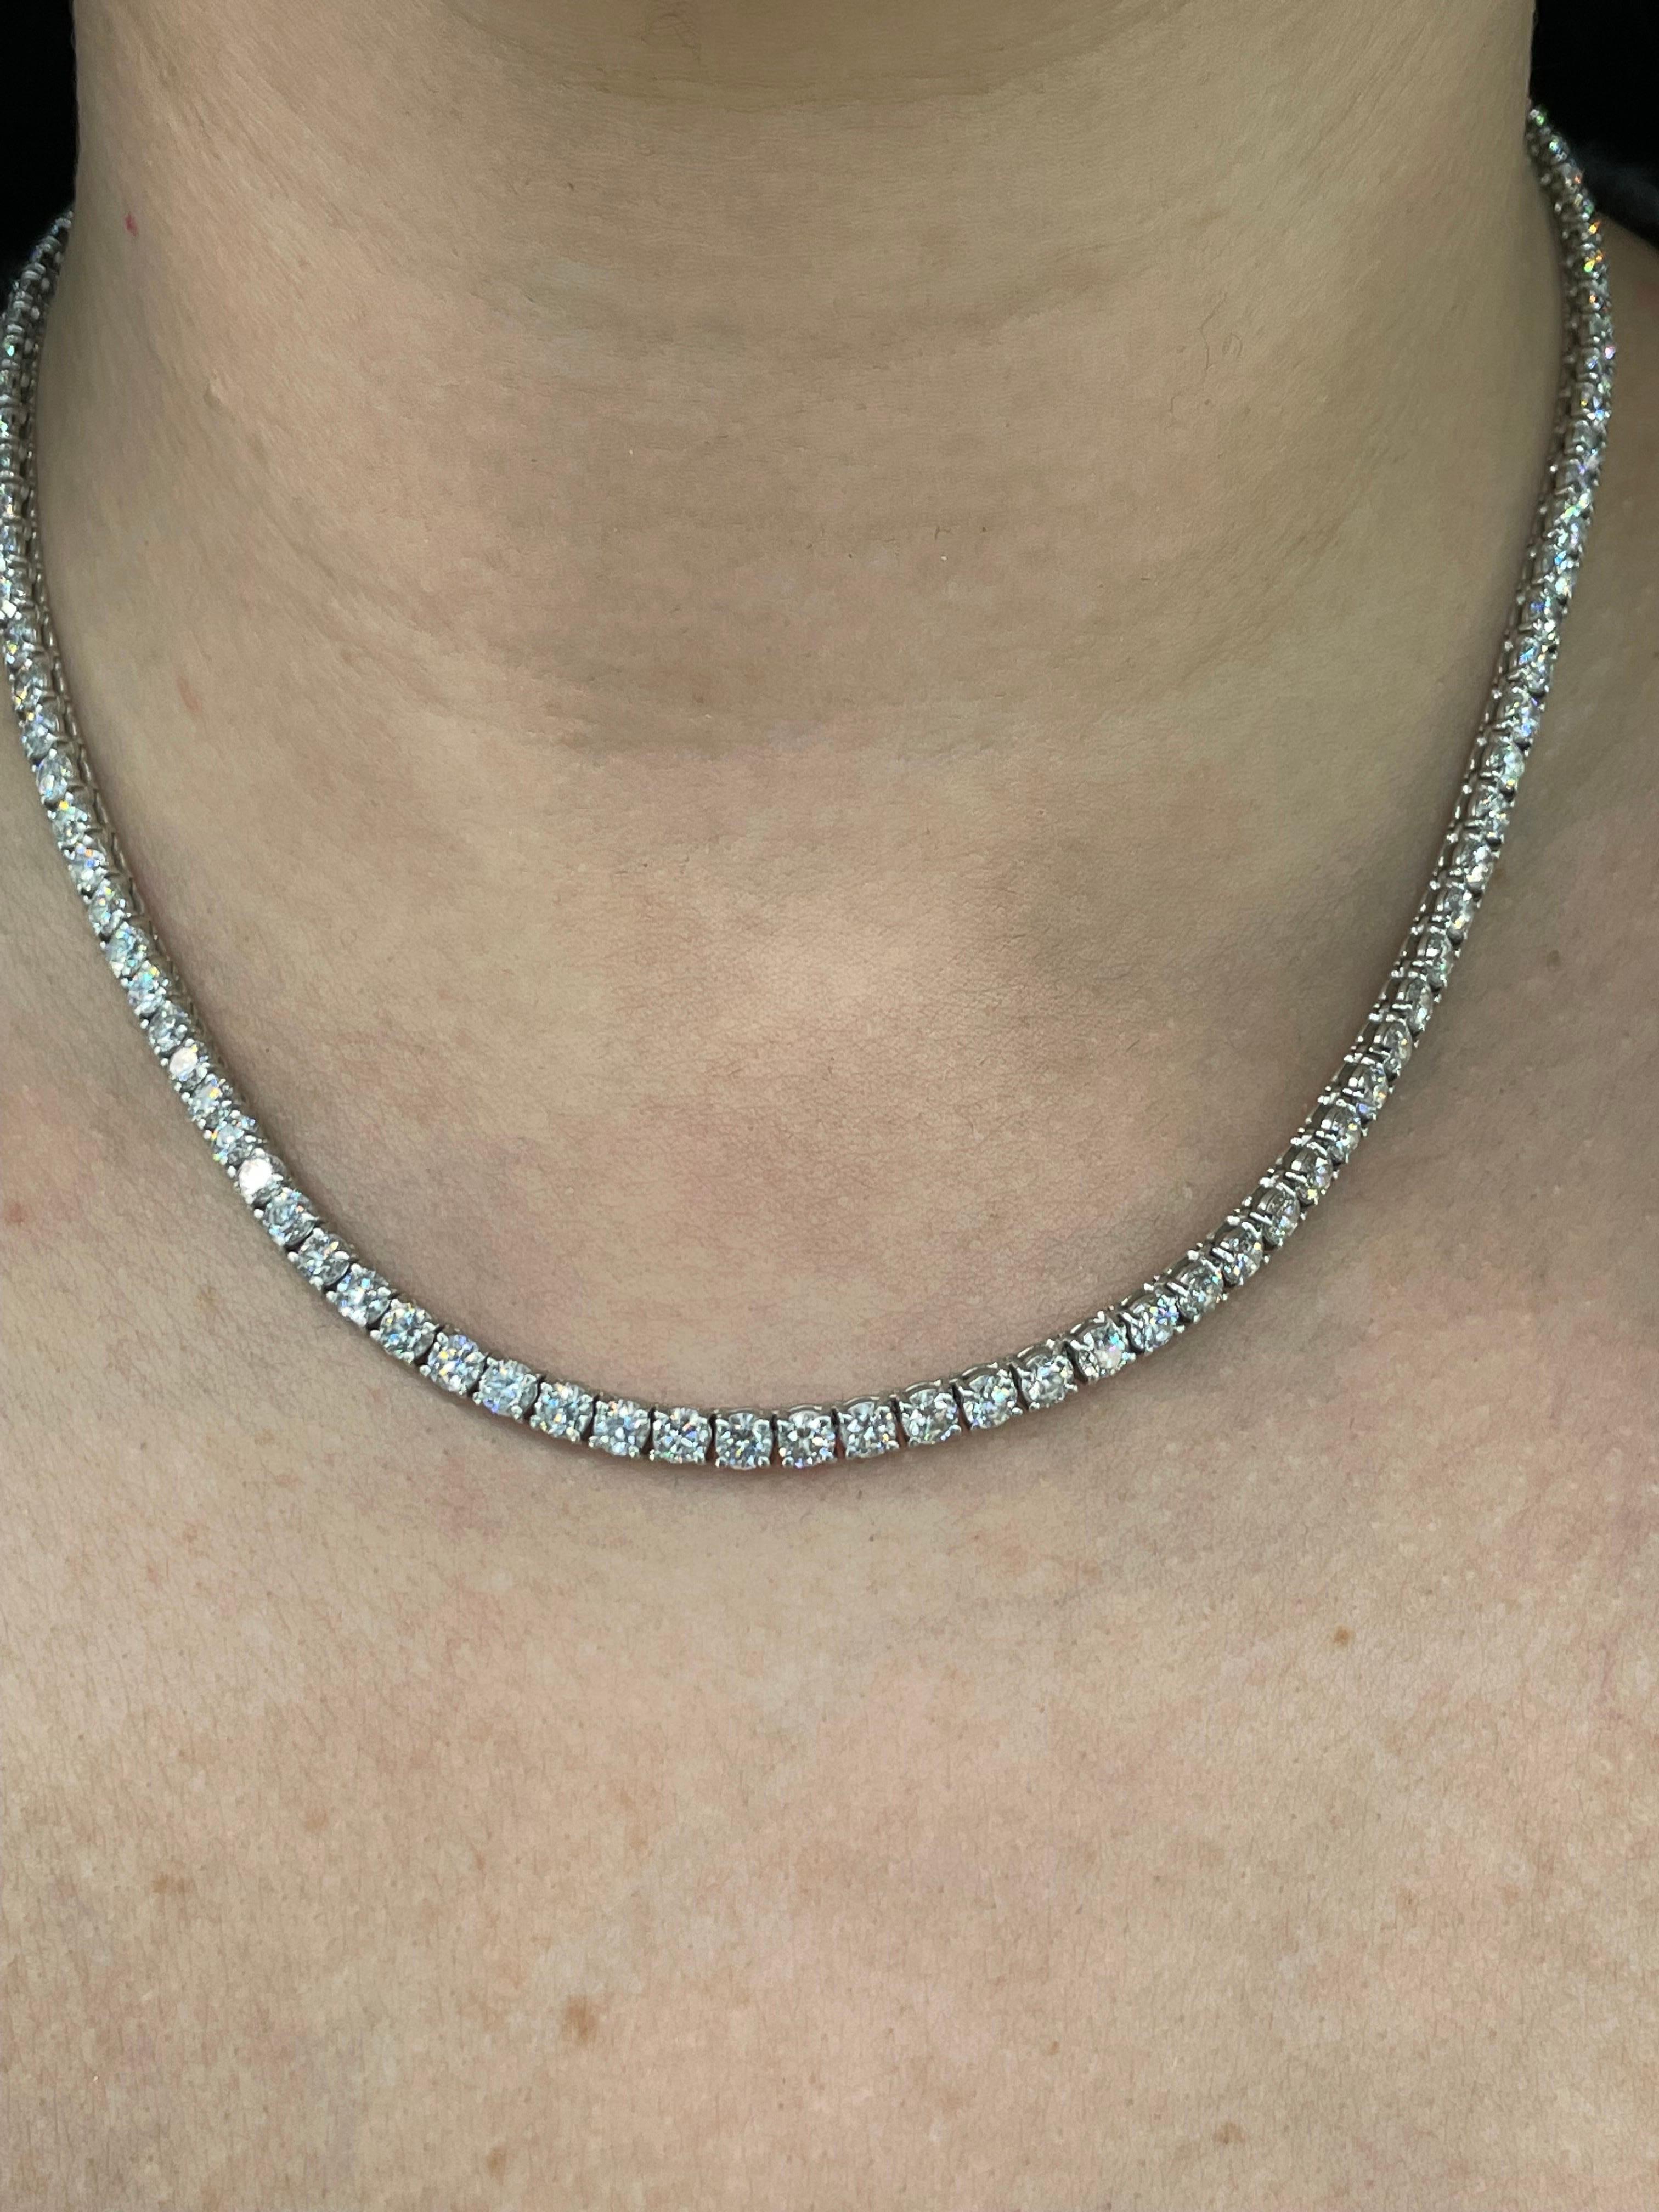 Diamonds Straight Line Necklace 17.25 Carats 14k White Gold 0.15 PTS For Sale 4